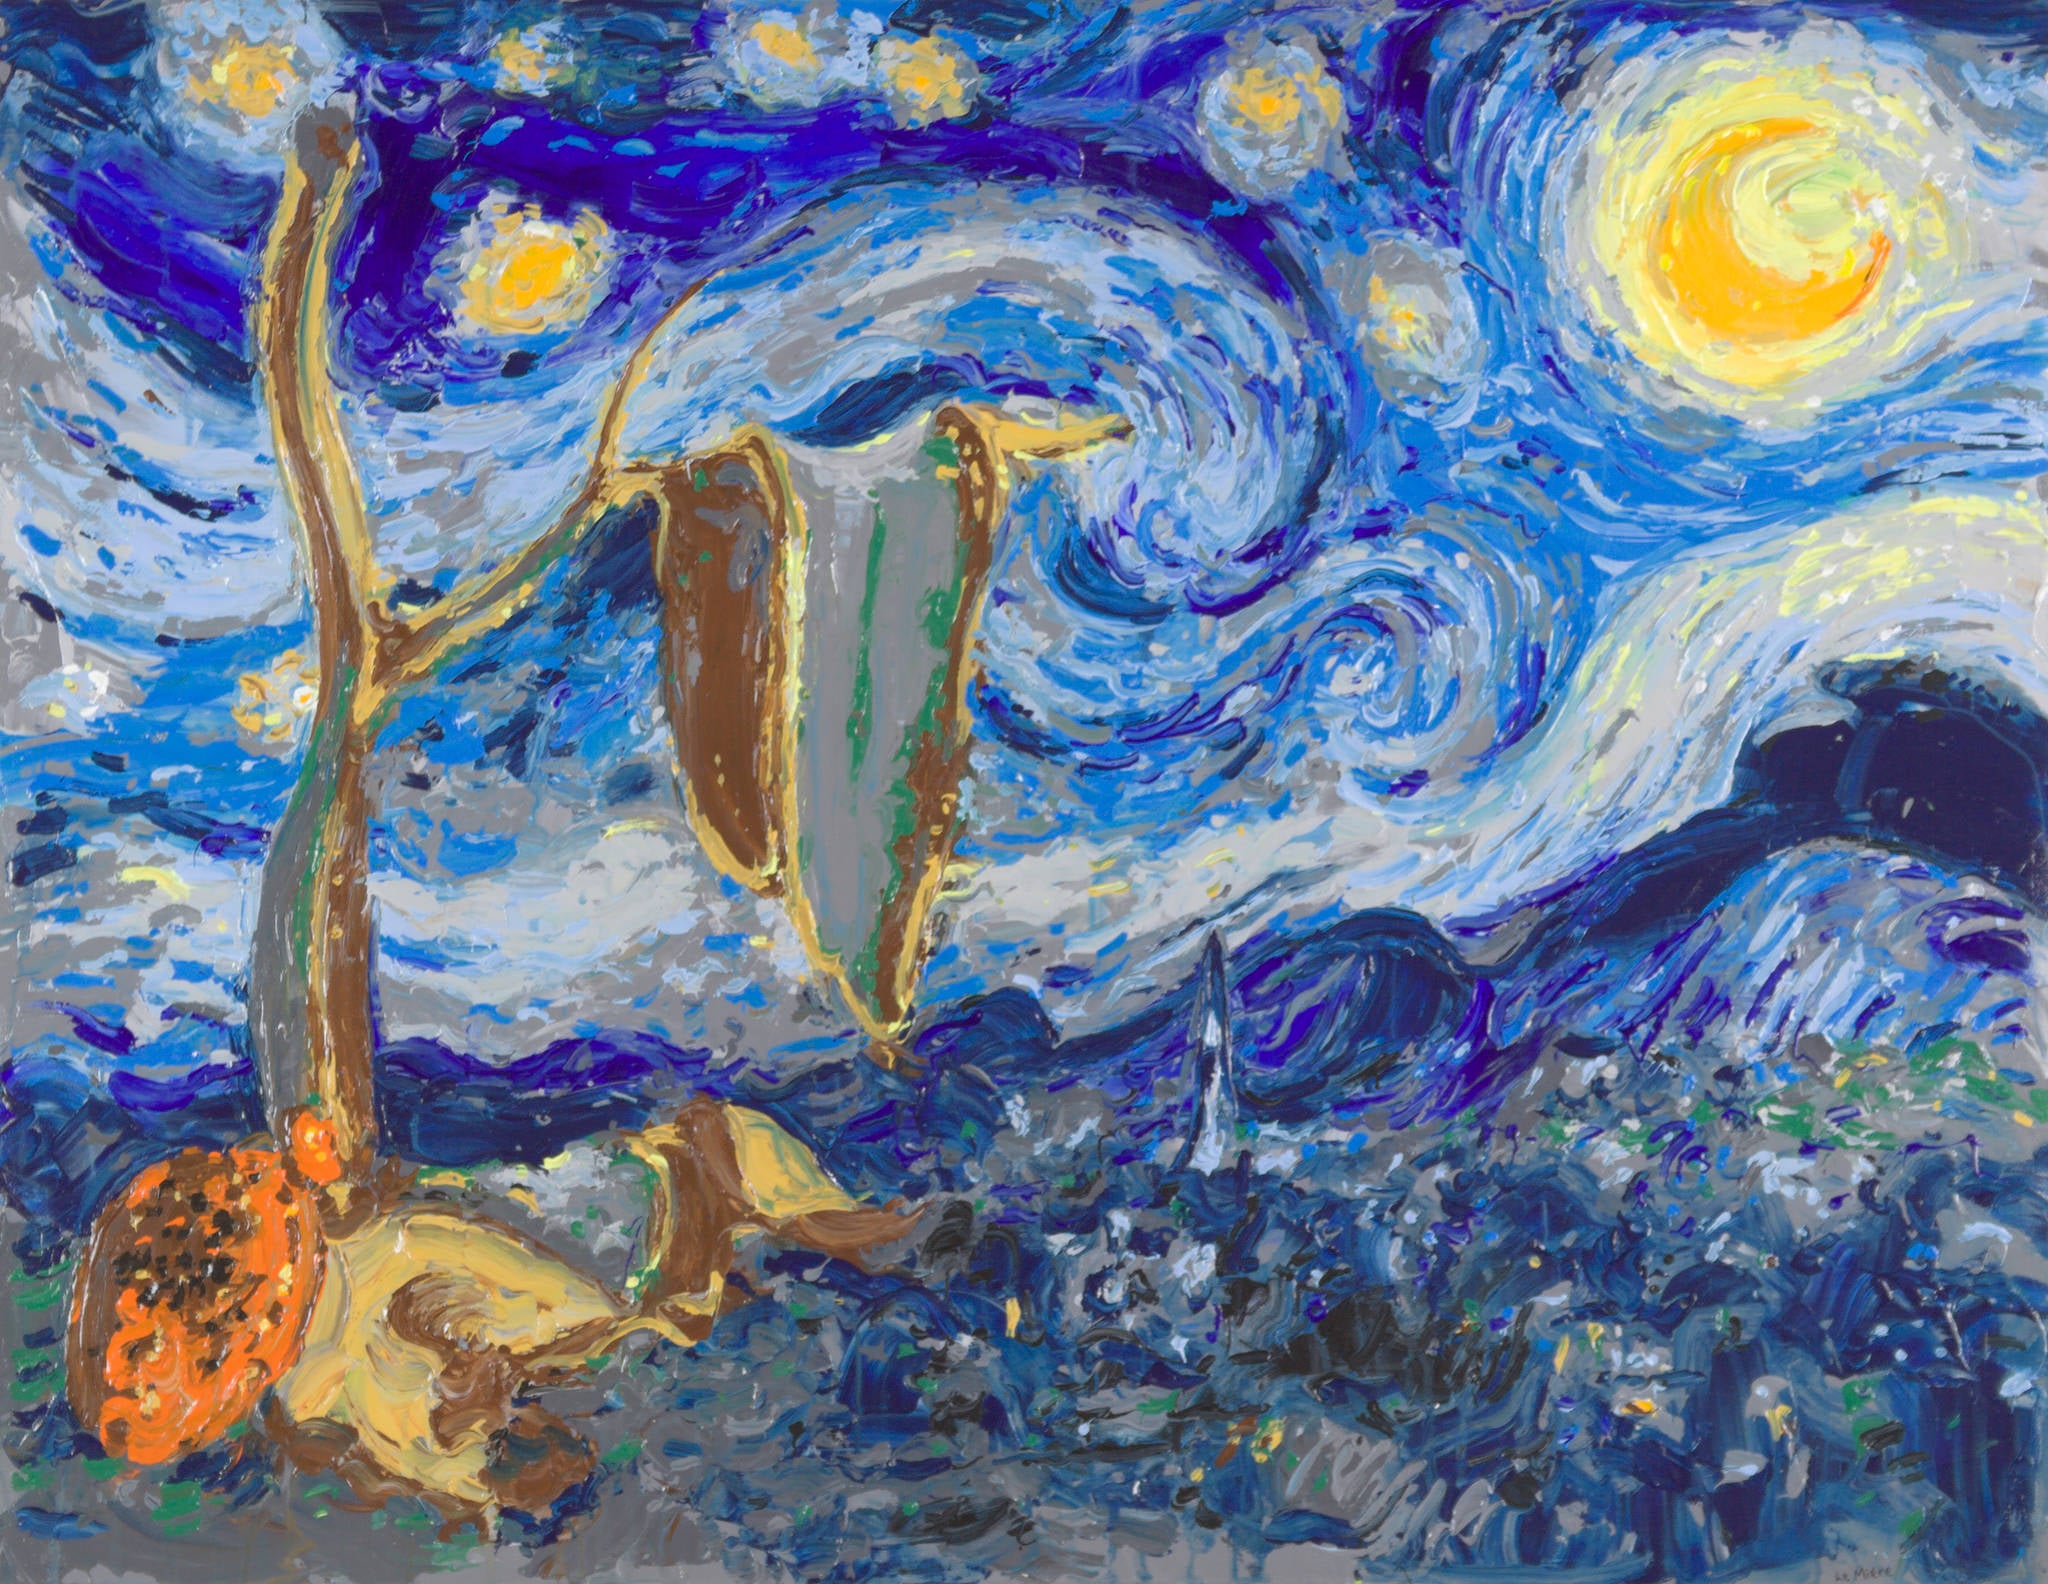 Philippe Le Miere 'Study for After Vincent Dali van Salvador Gogh - The Persistence of the Starry Night Memory'